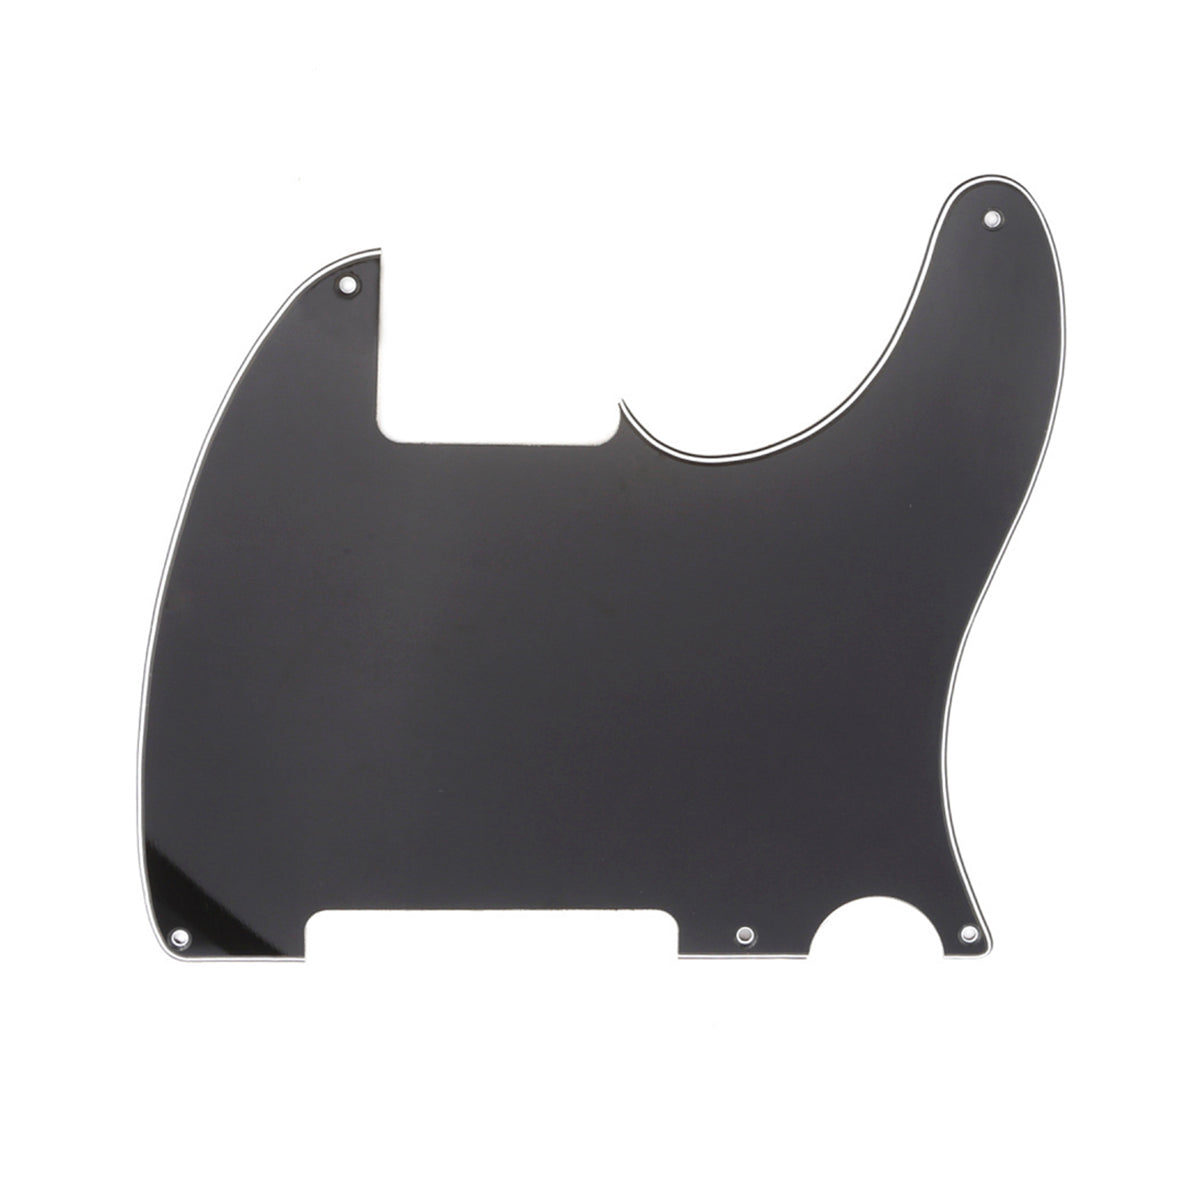 Musiclily 5 Hole Tele Pickguard Blank for Fender USA/Mexican Telecaster Esquire Guitar, 3Ply Black